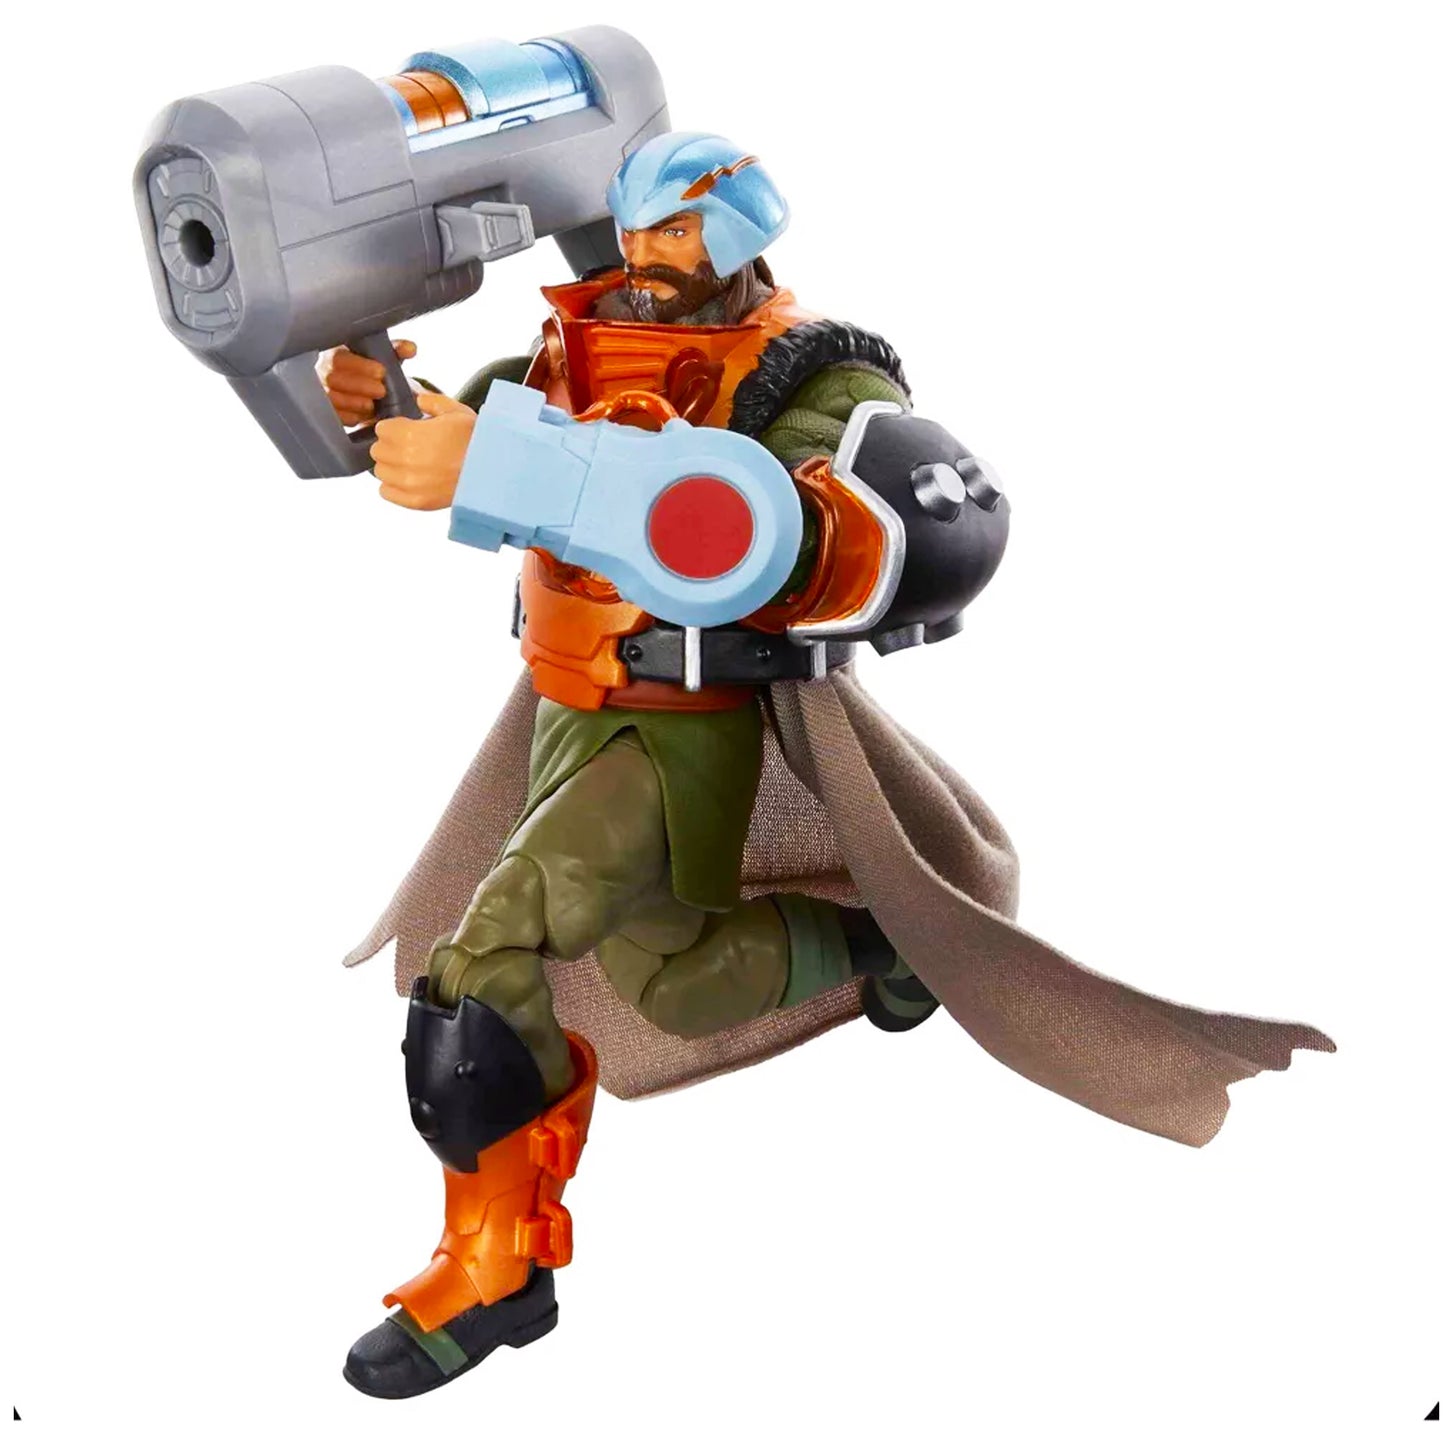 Masters of The Universe Revelation Man-At-Arms Deluxe